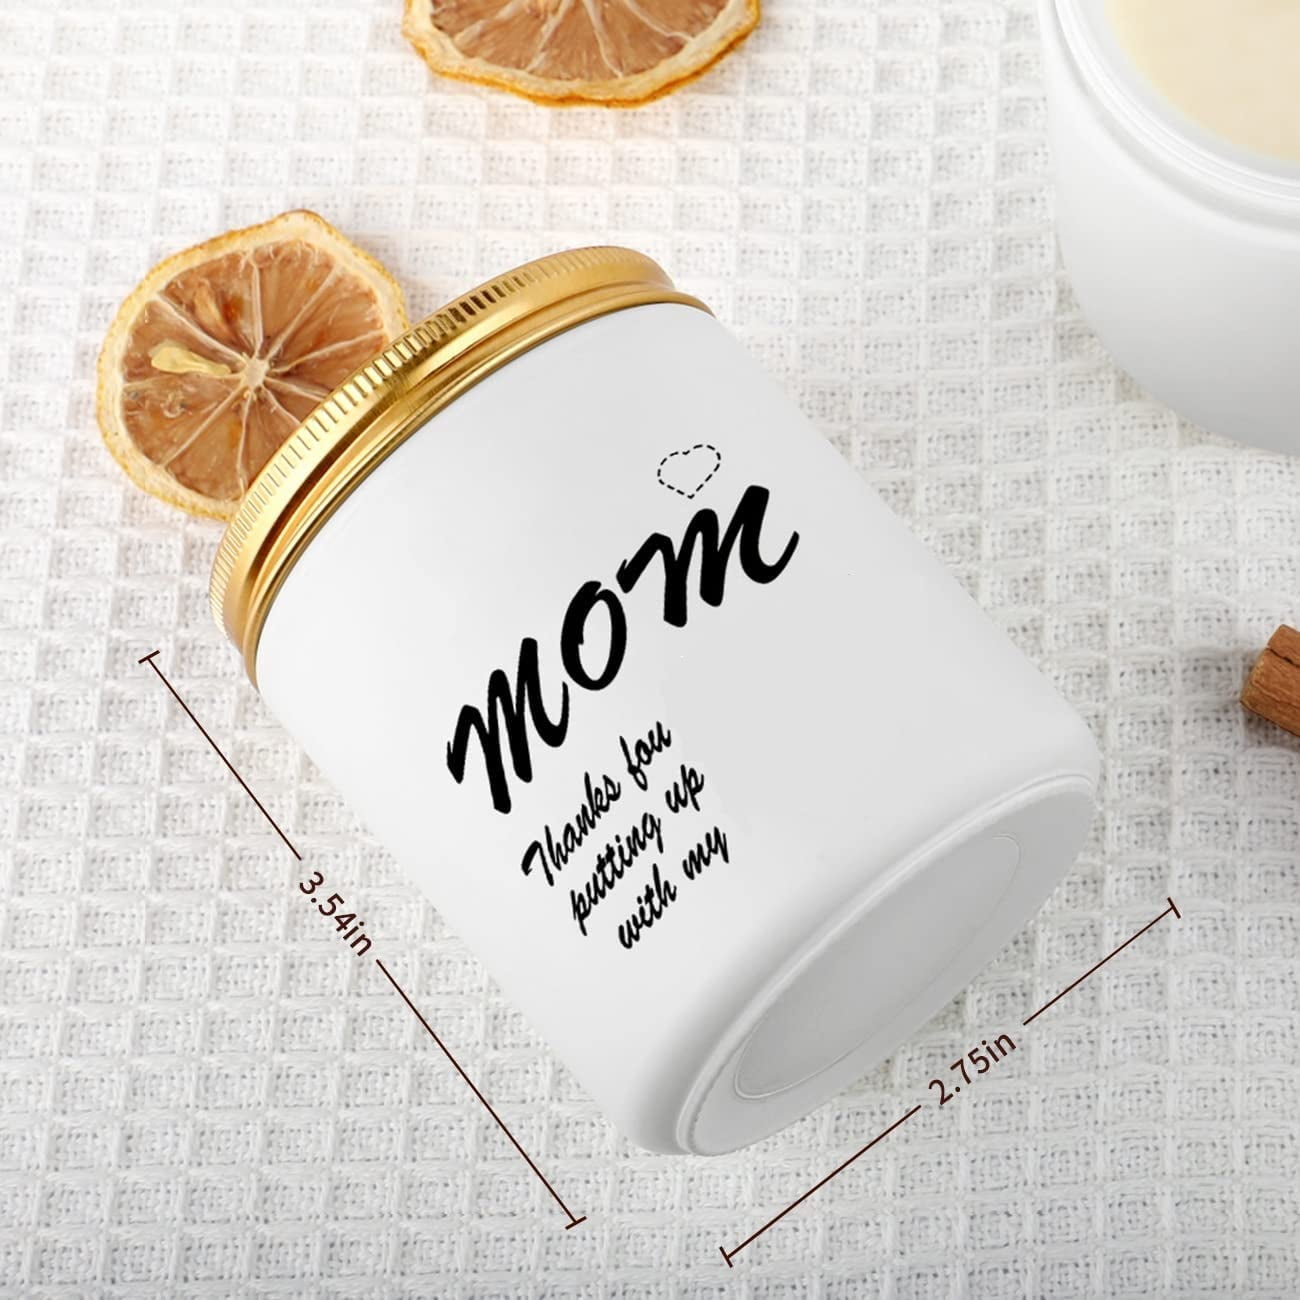 Gifts for Mom from Daughter Son, Best Mom Gifts, Funny Mom Christmas Gifts,  Mothers Day Gifts, Thanksgiving Gifts, Birthday Gifts for Mom Stepmother  Adoptive Mother, Lavender Scented Candles